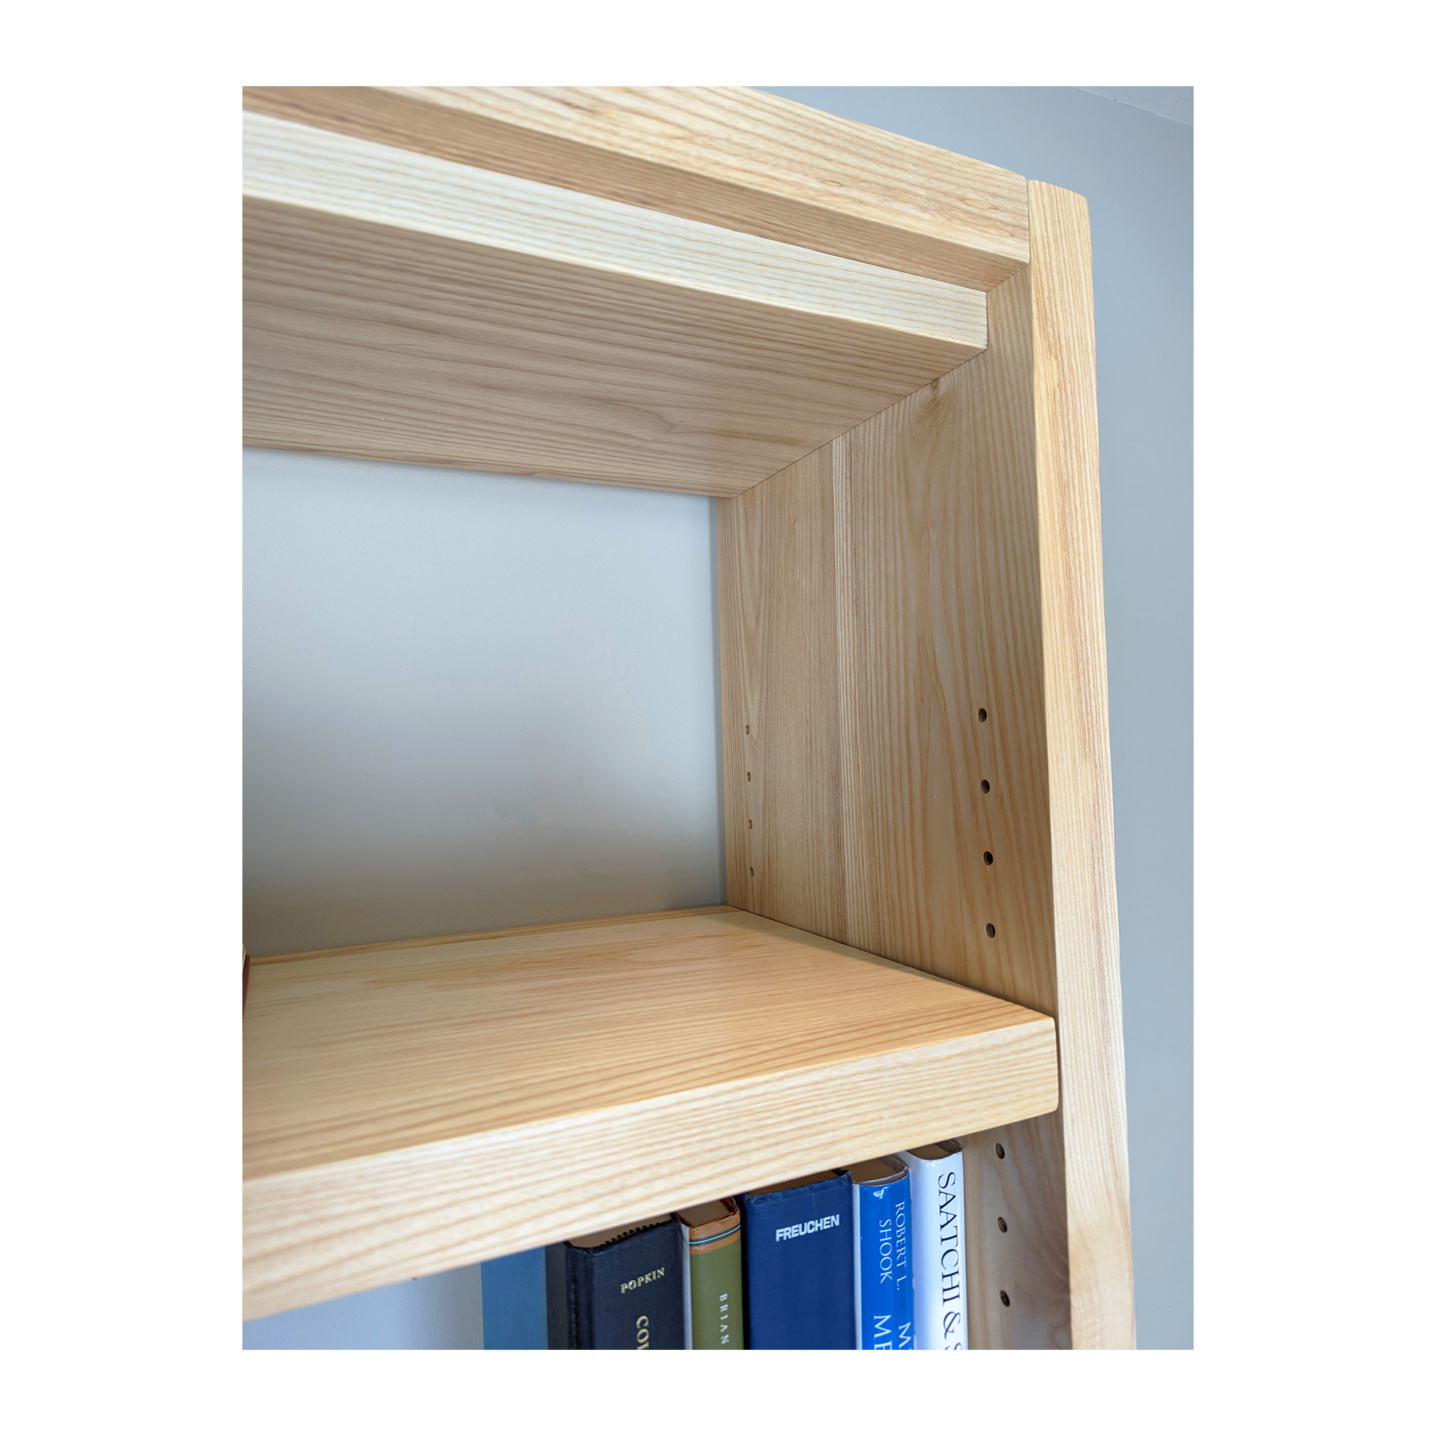 Locally made bookcase with adjustable shelves